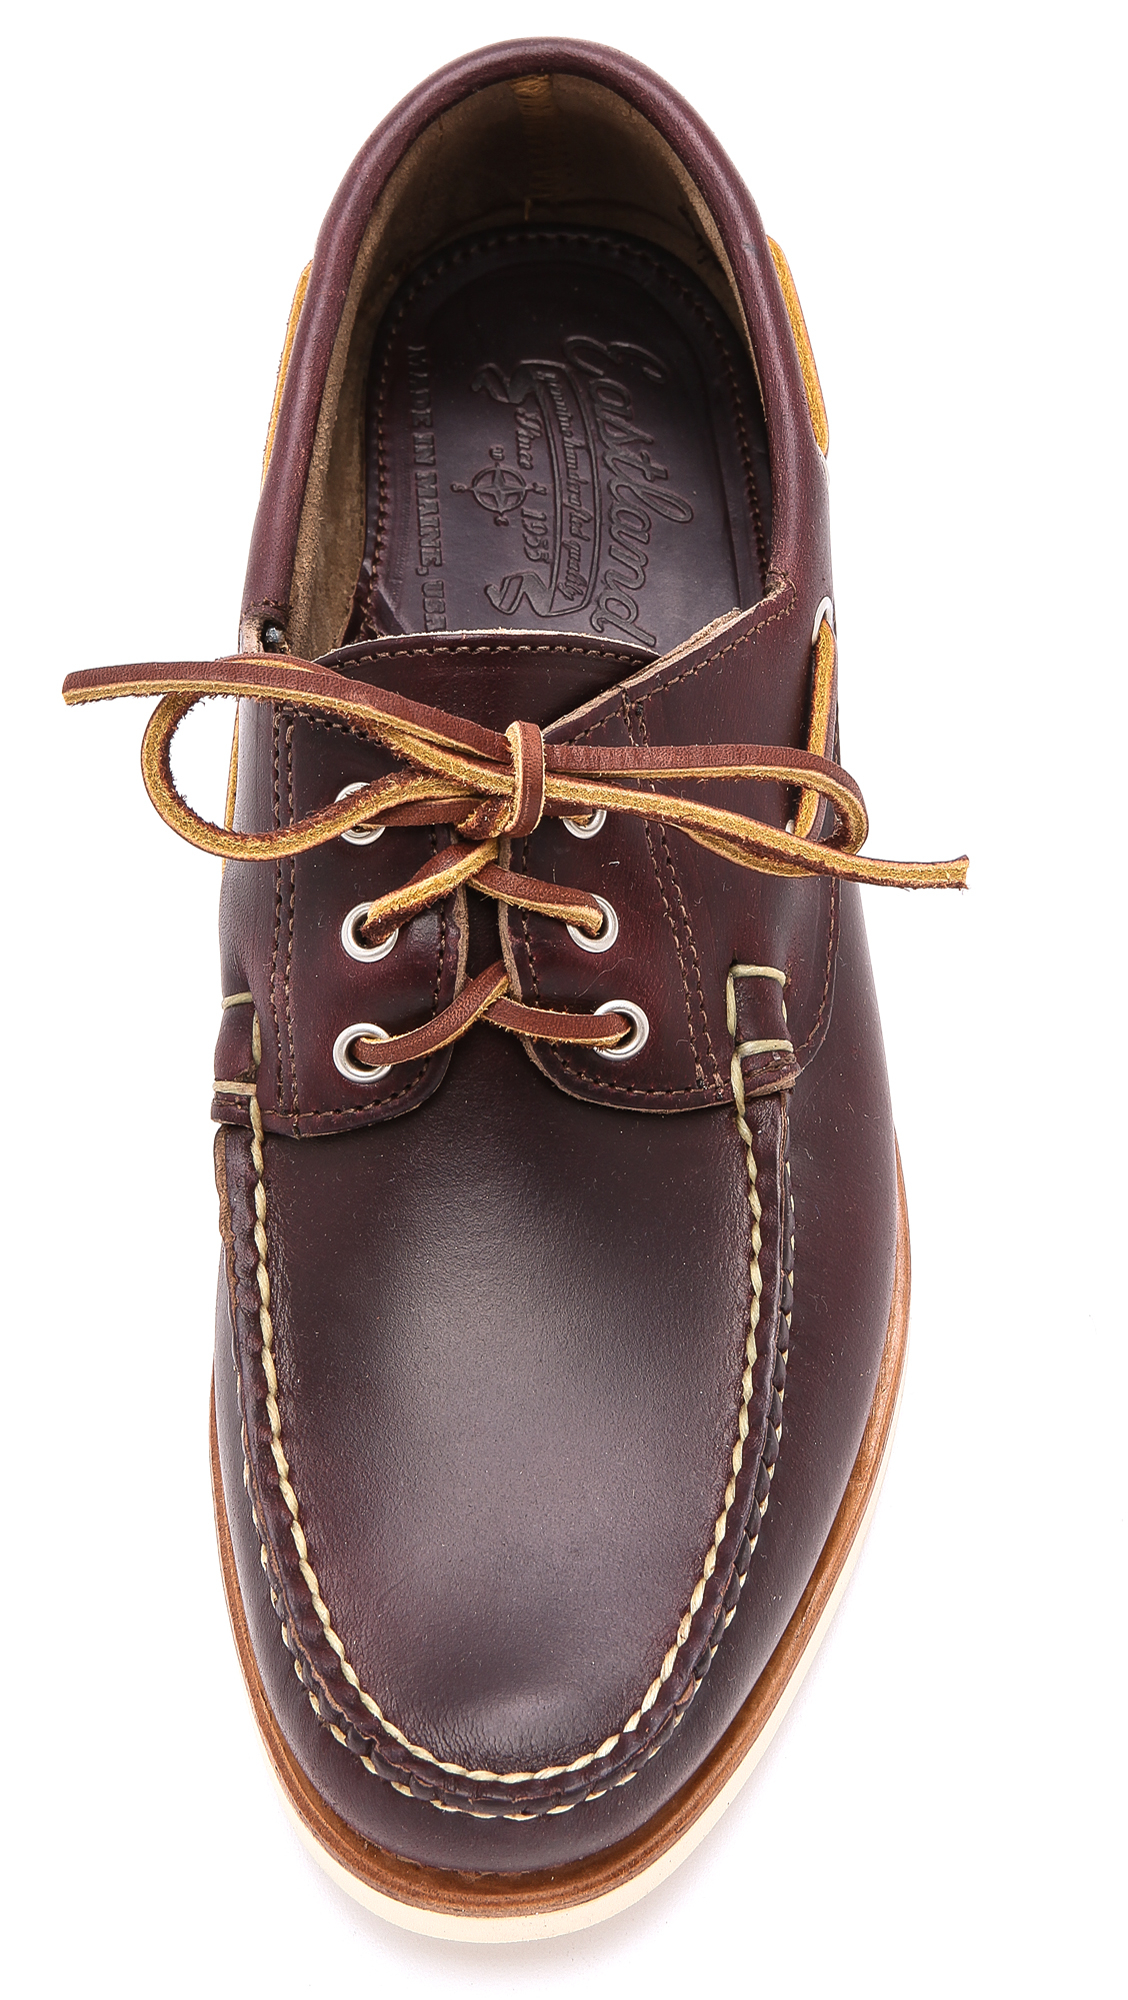 Eastland Milo Usa Deck Shoes in Brown for Men - Lyst